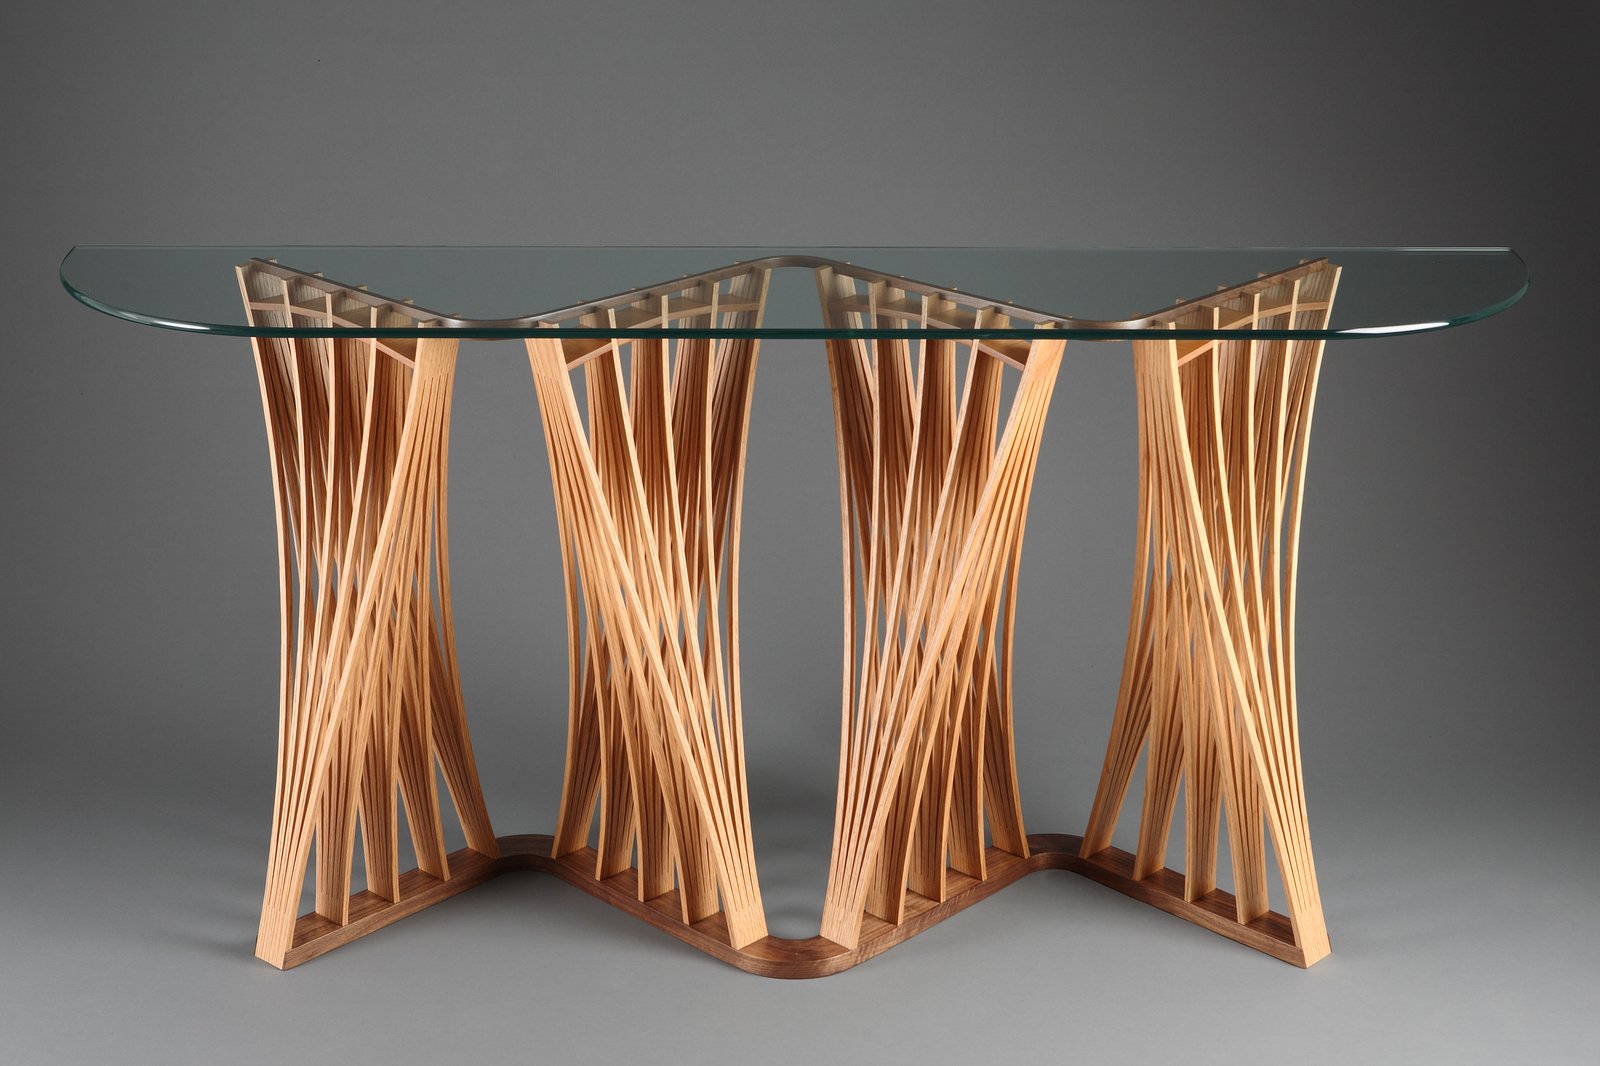 Creating Functional and Aesthetically Pleasing Furniture in the Great Outdoors